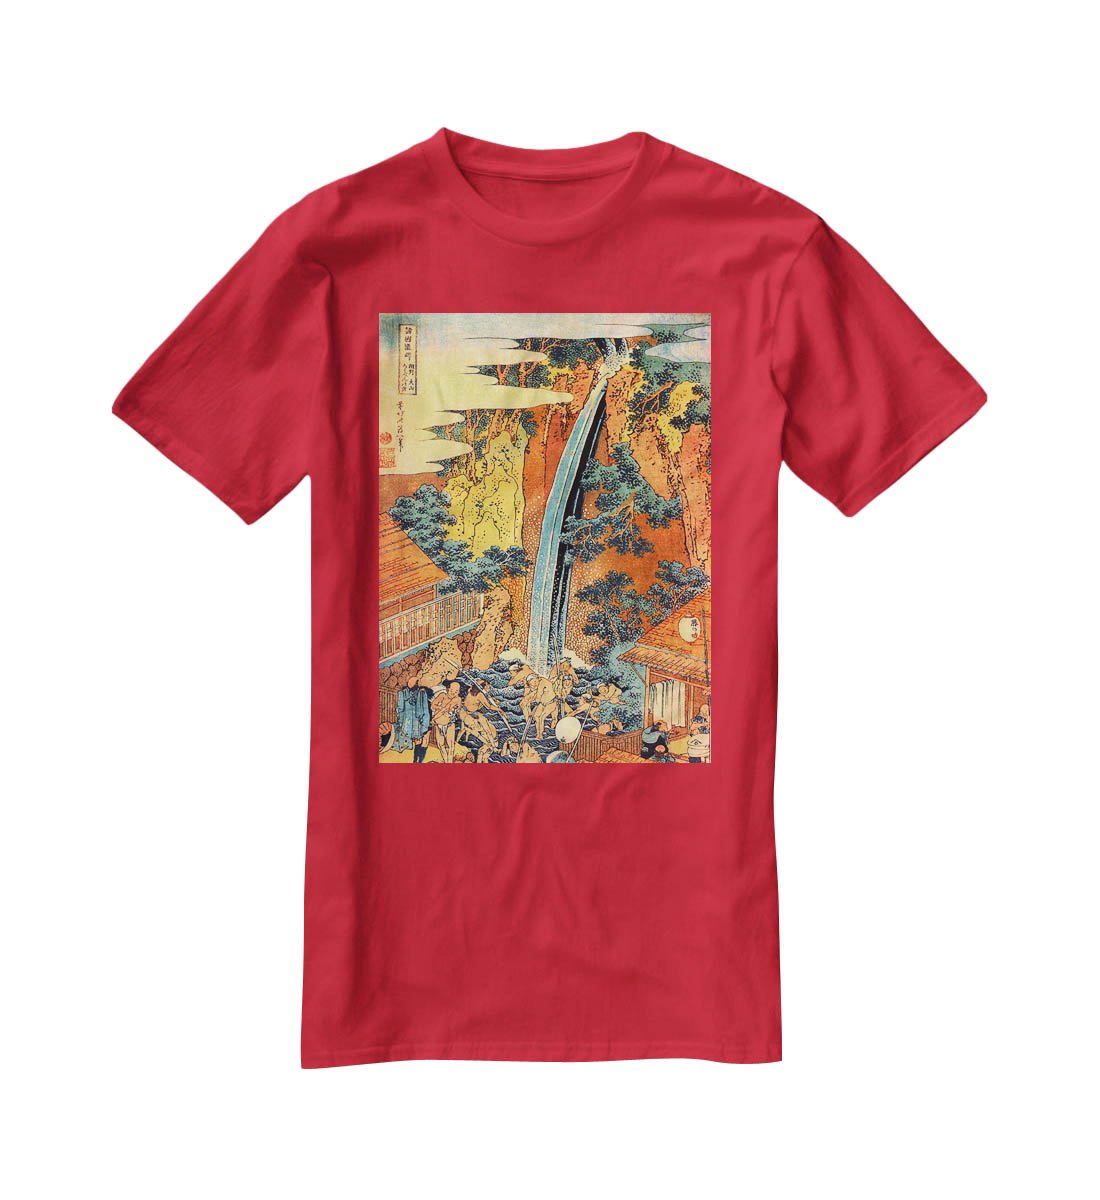 Waterfalls in all provinces 2 by Hokusai T-Shirt - Canvas Art Rocks - 4